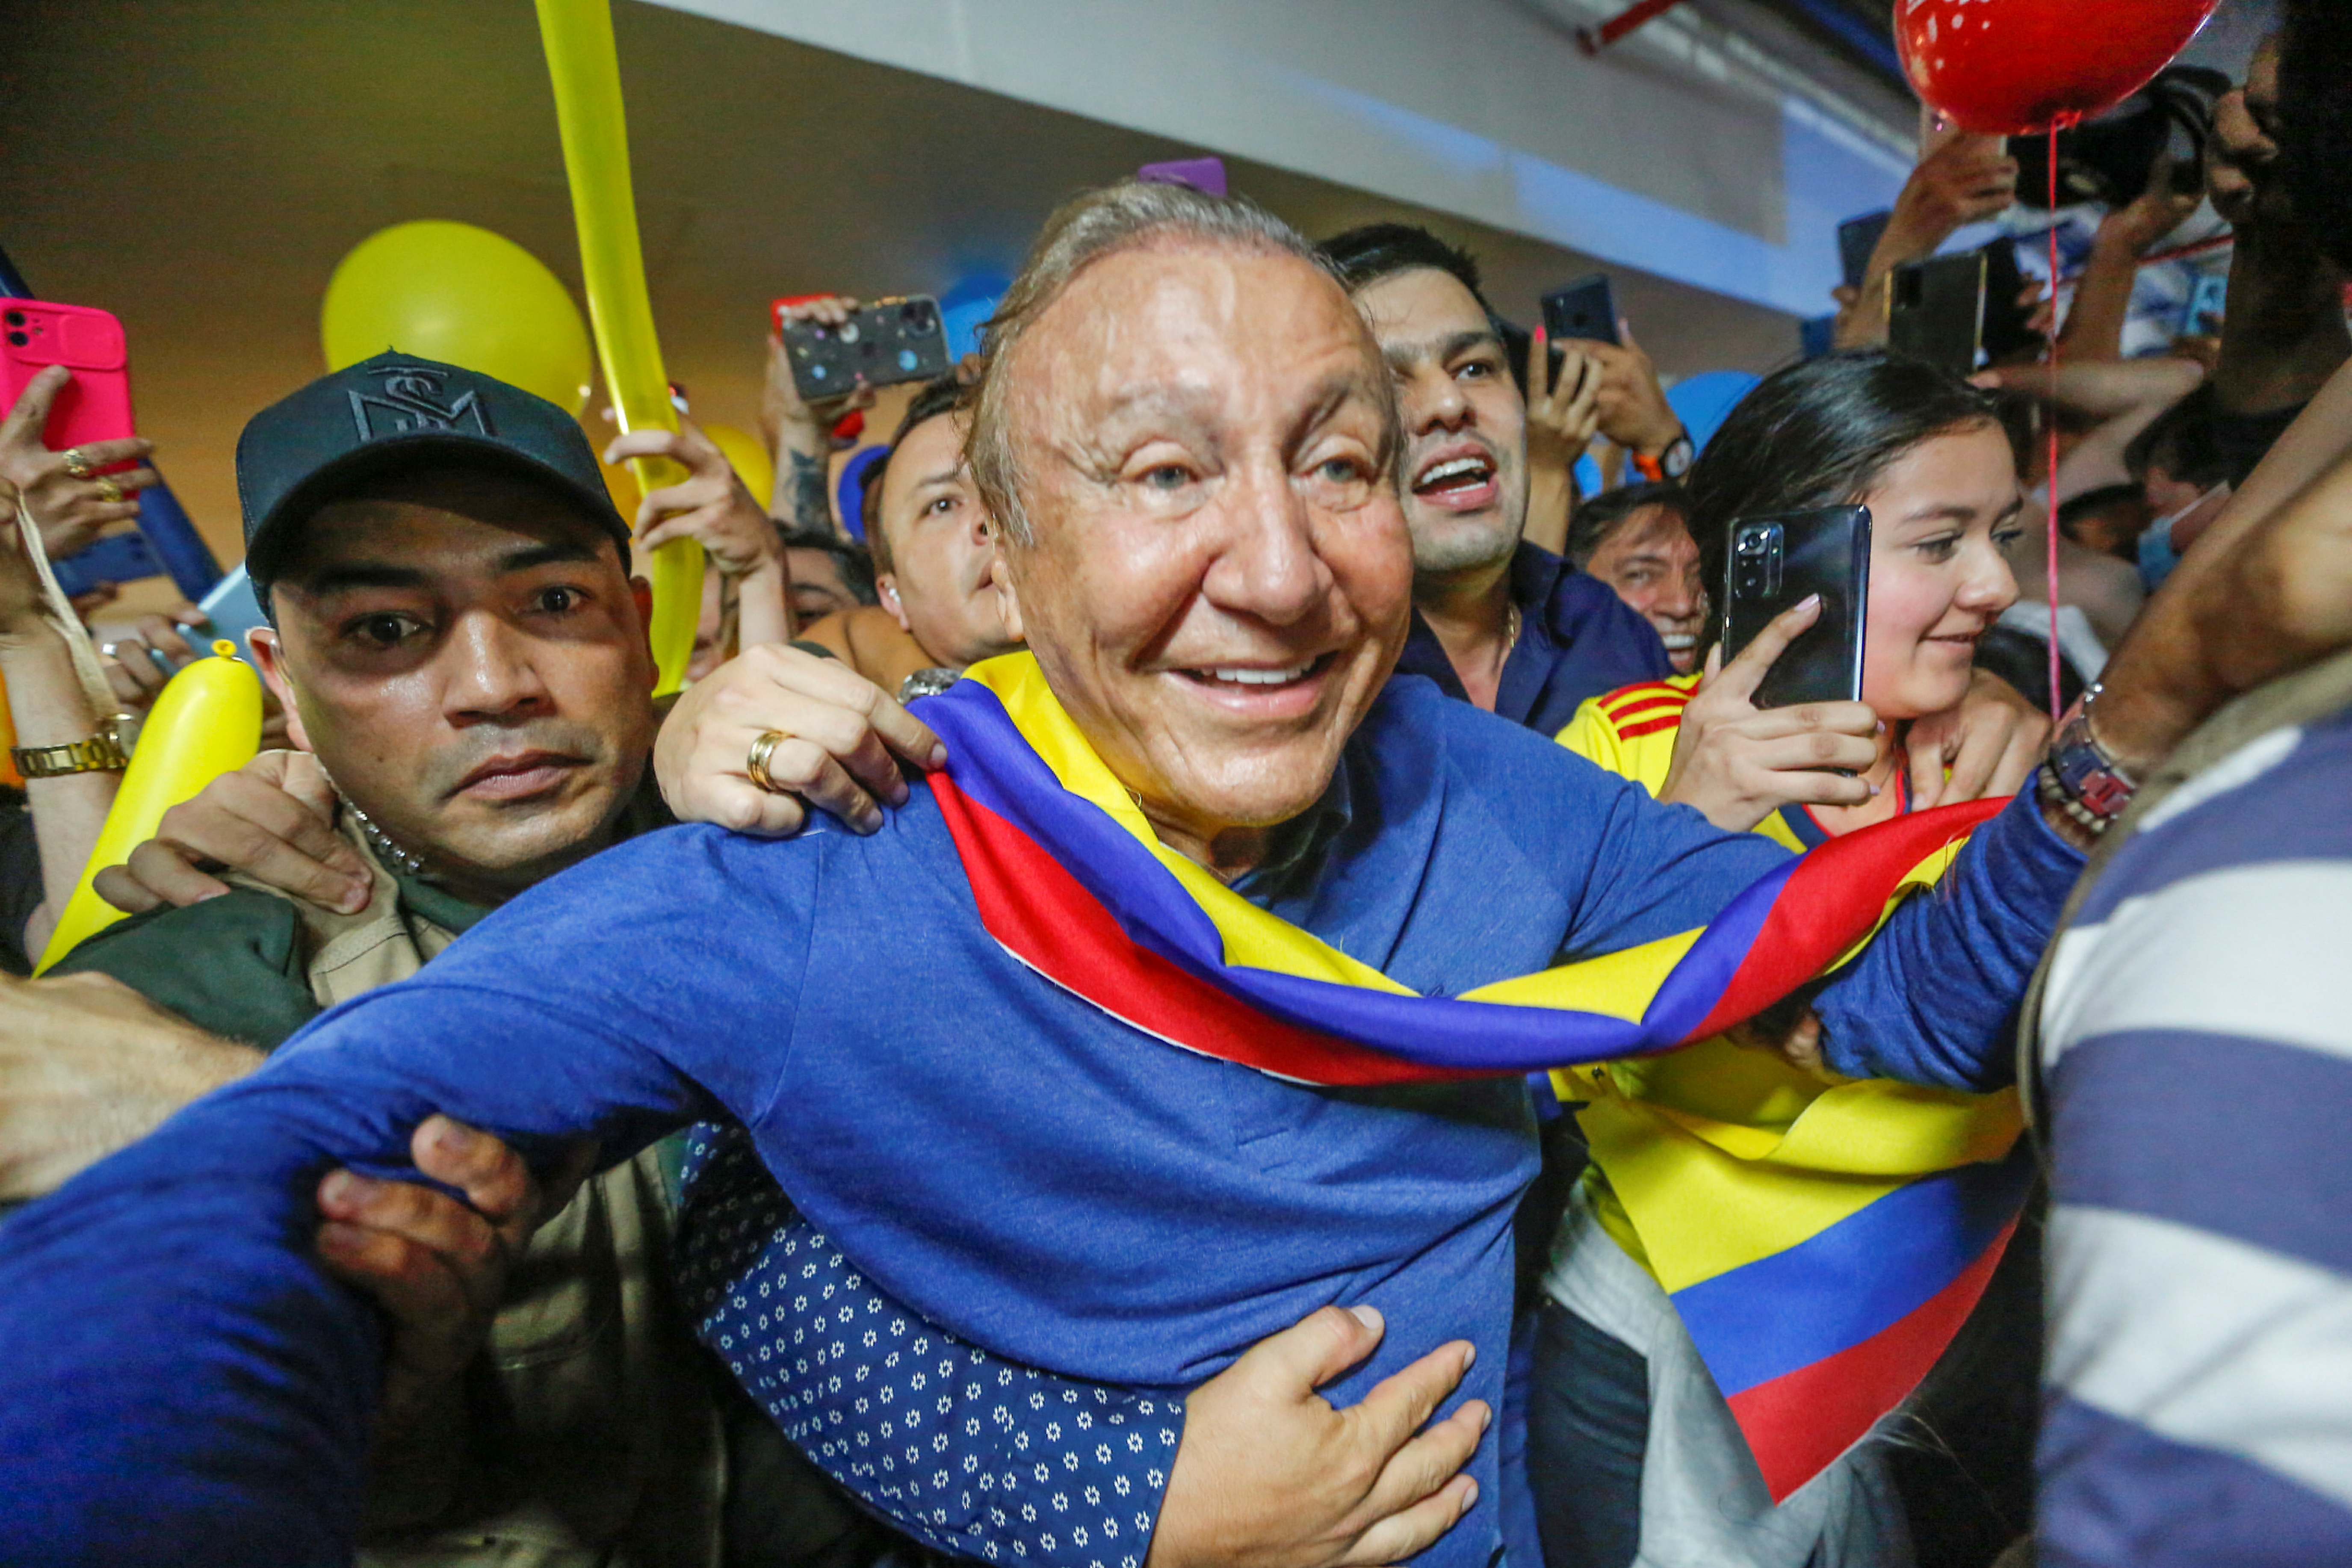 Colombian centre-right presidential candidate Rodolfo Hernandez of Anti-Corruption Rulers' League Party greets his supporters after his arrival at Palonegro International Airport in Bucaramanga